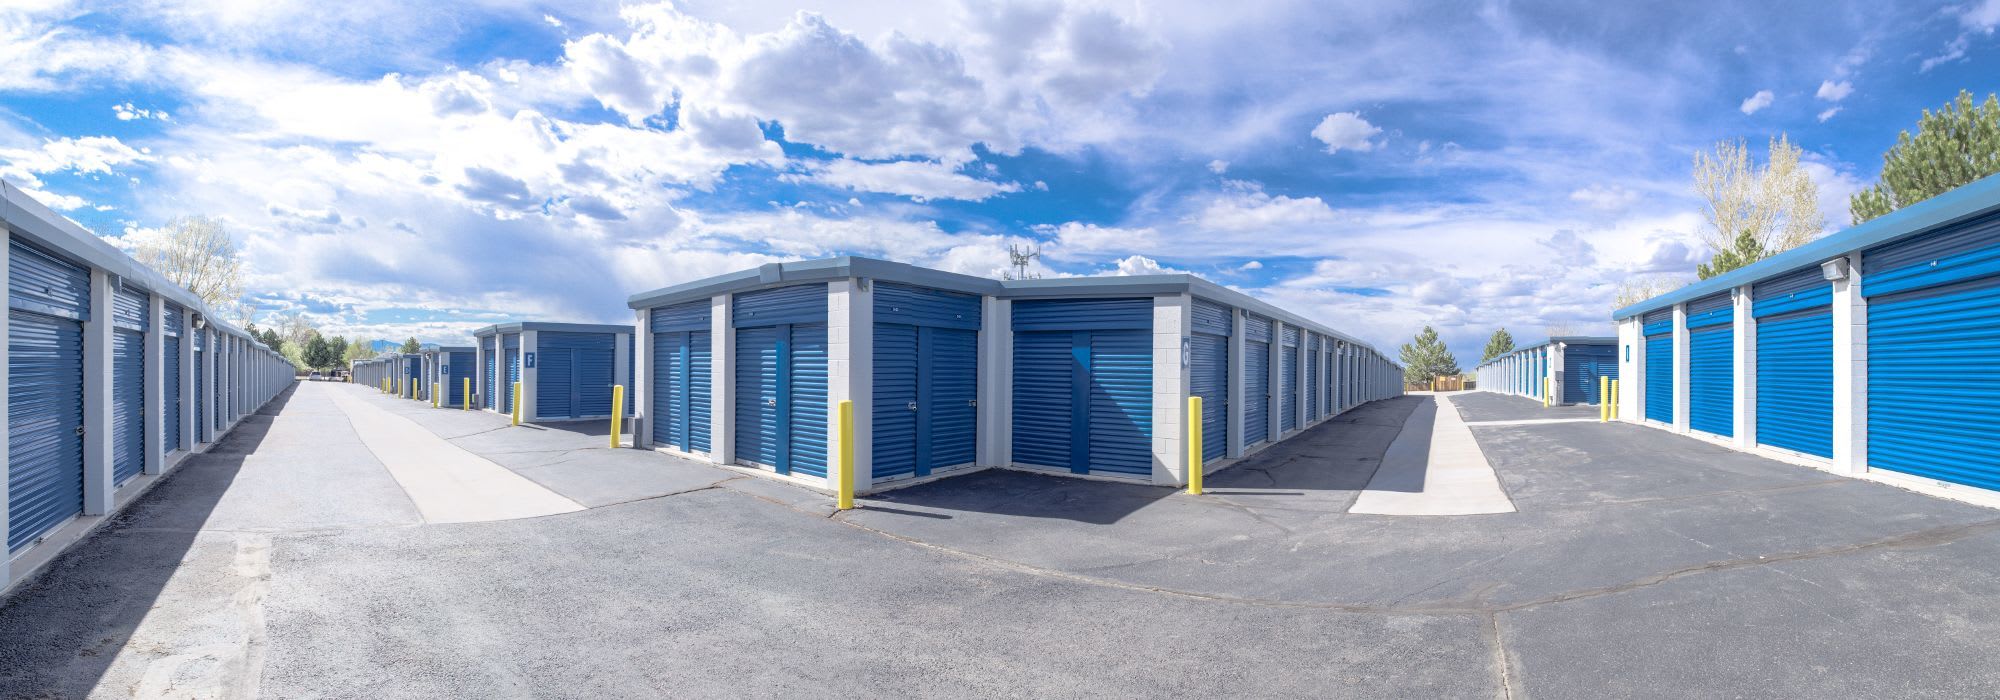 The Benefits Of Using Storage Units For Moving Day